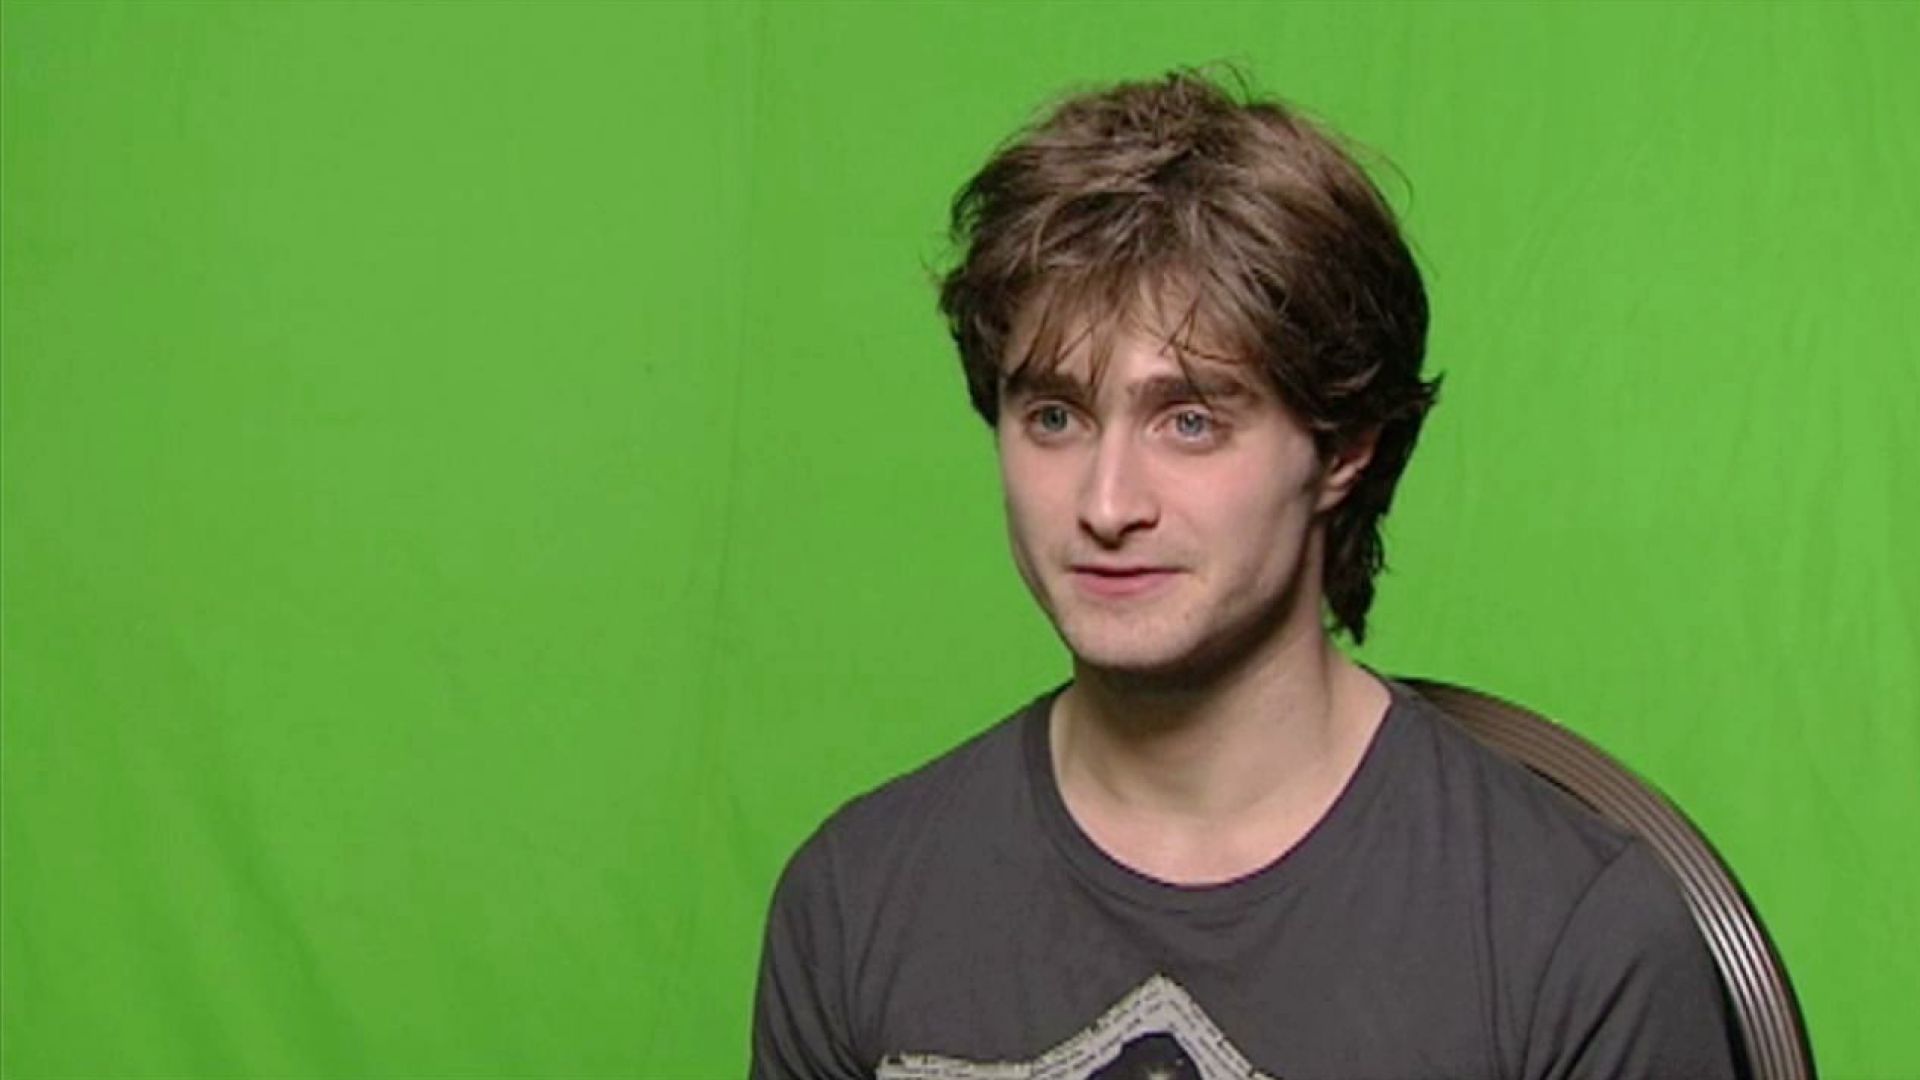 Daniel Radcliffe talks about playing Harry Potter in Harry Potter 7 Part 2